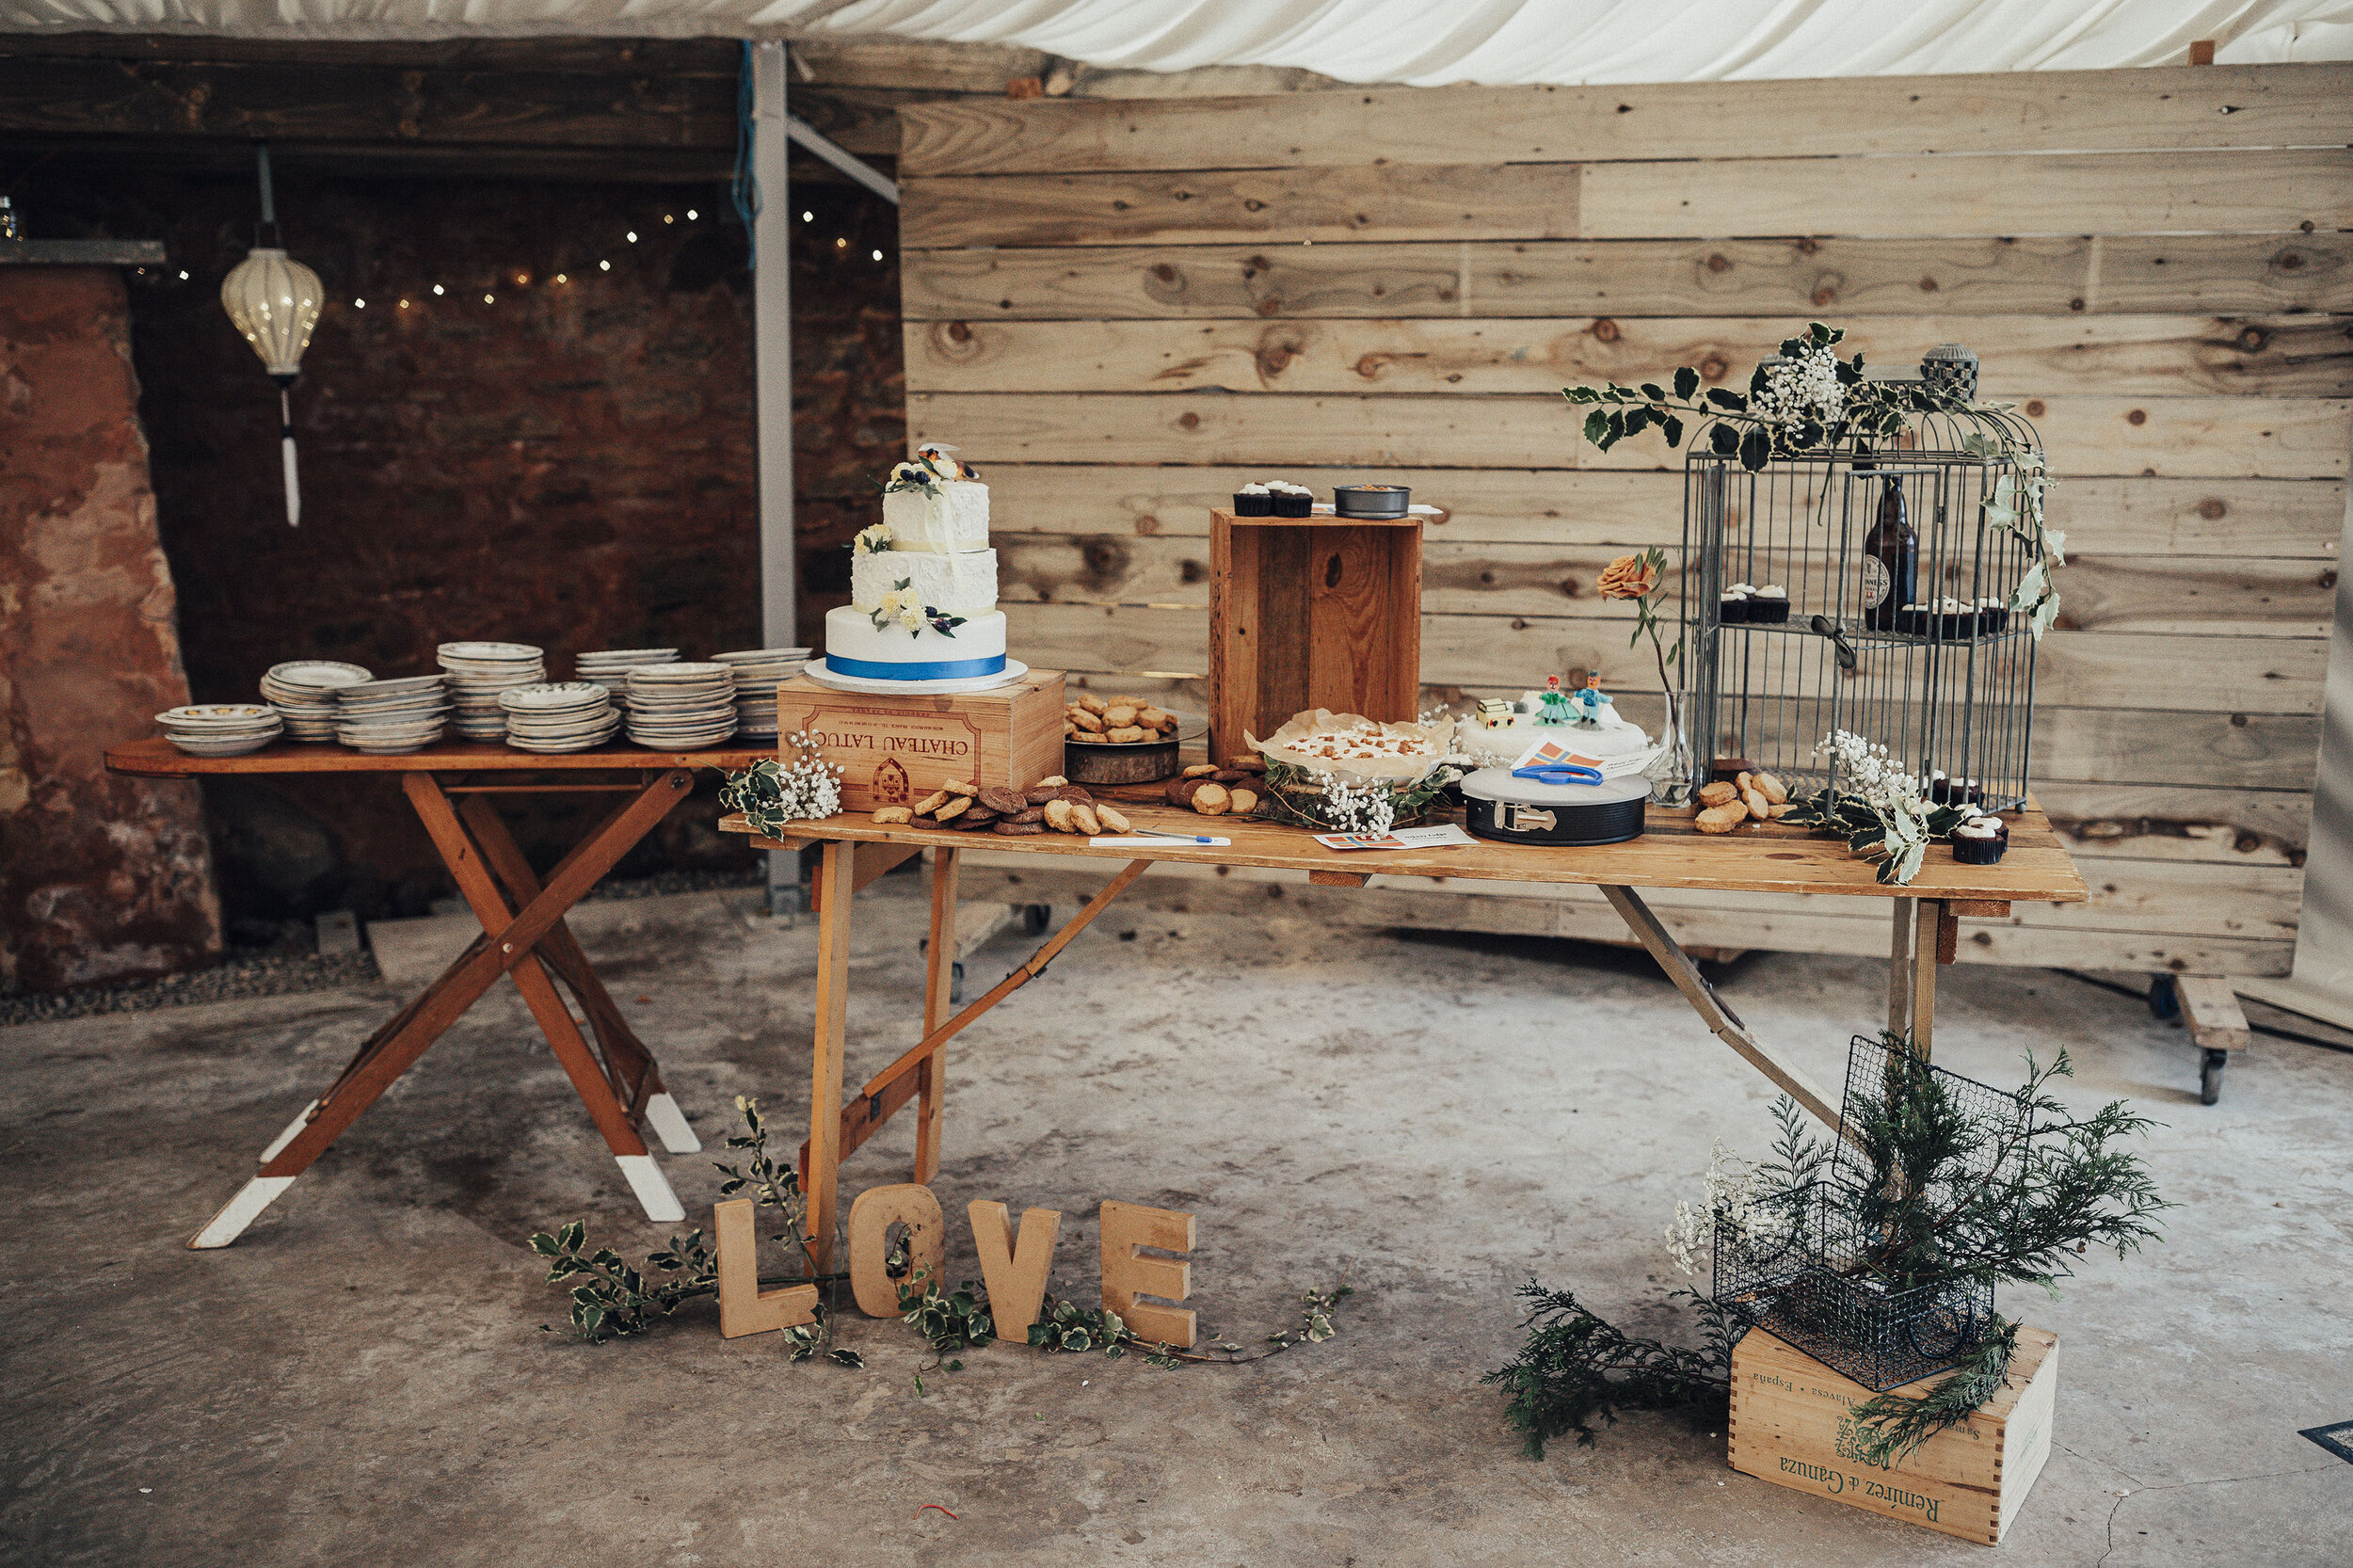 COW_SHED_CRAIL_WEDDING_PJ_PHILLIPS_PHOTOGRAPHY_67.jpg